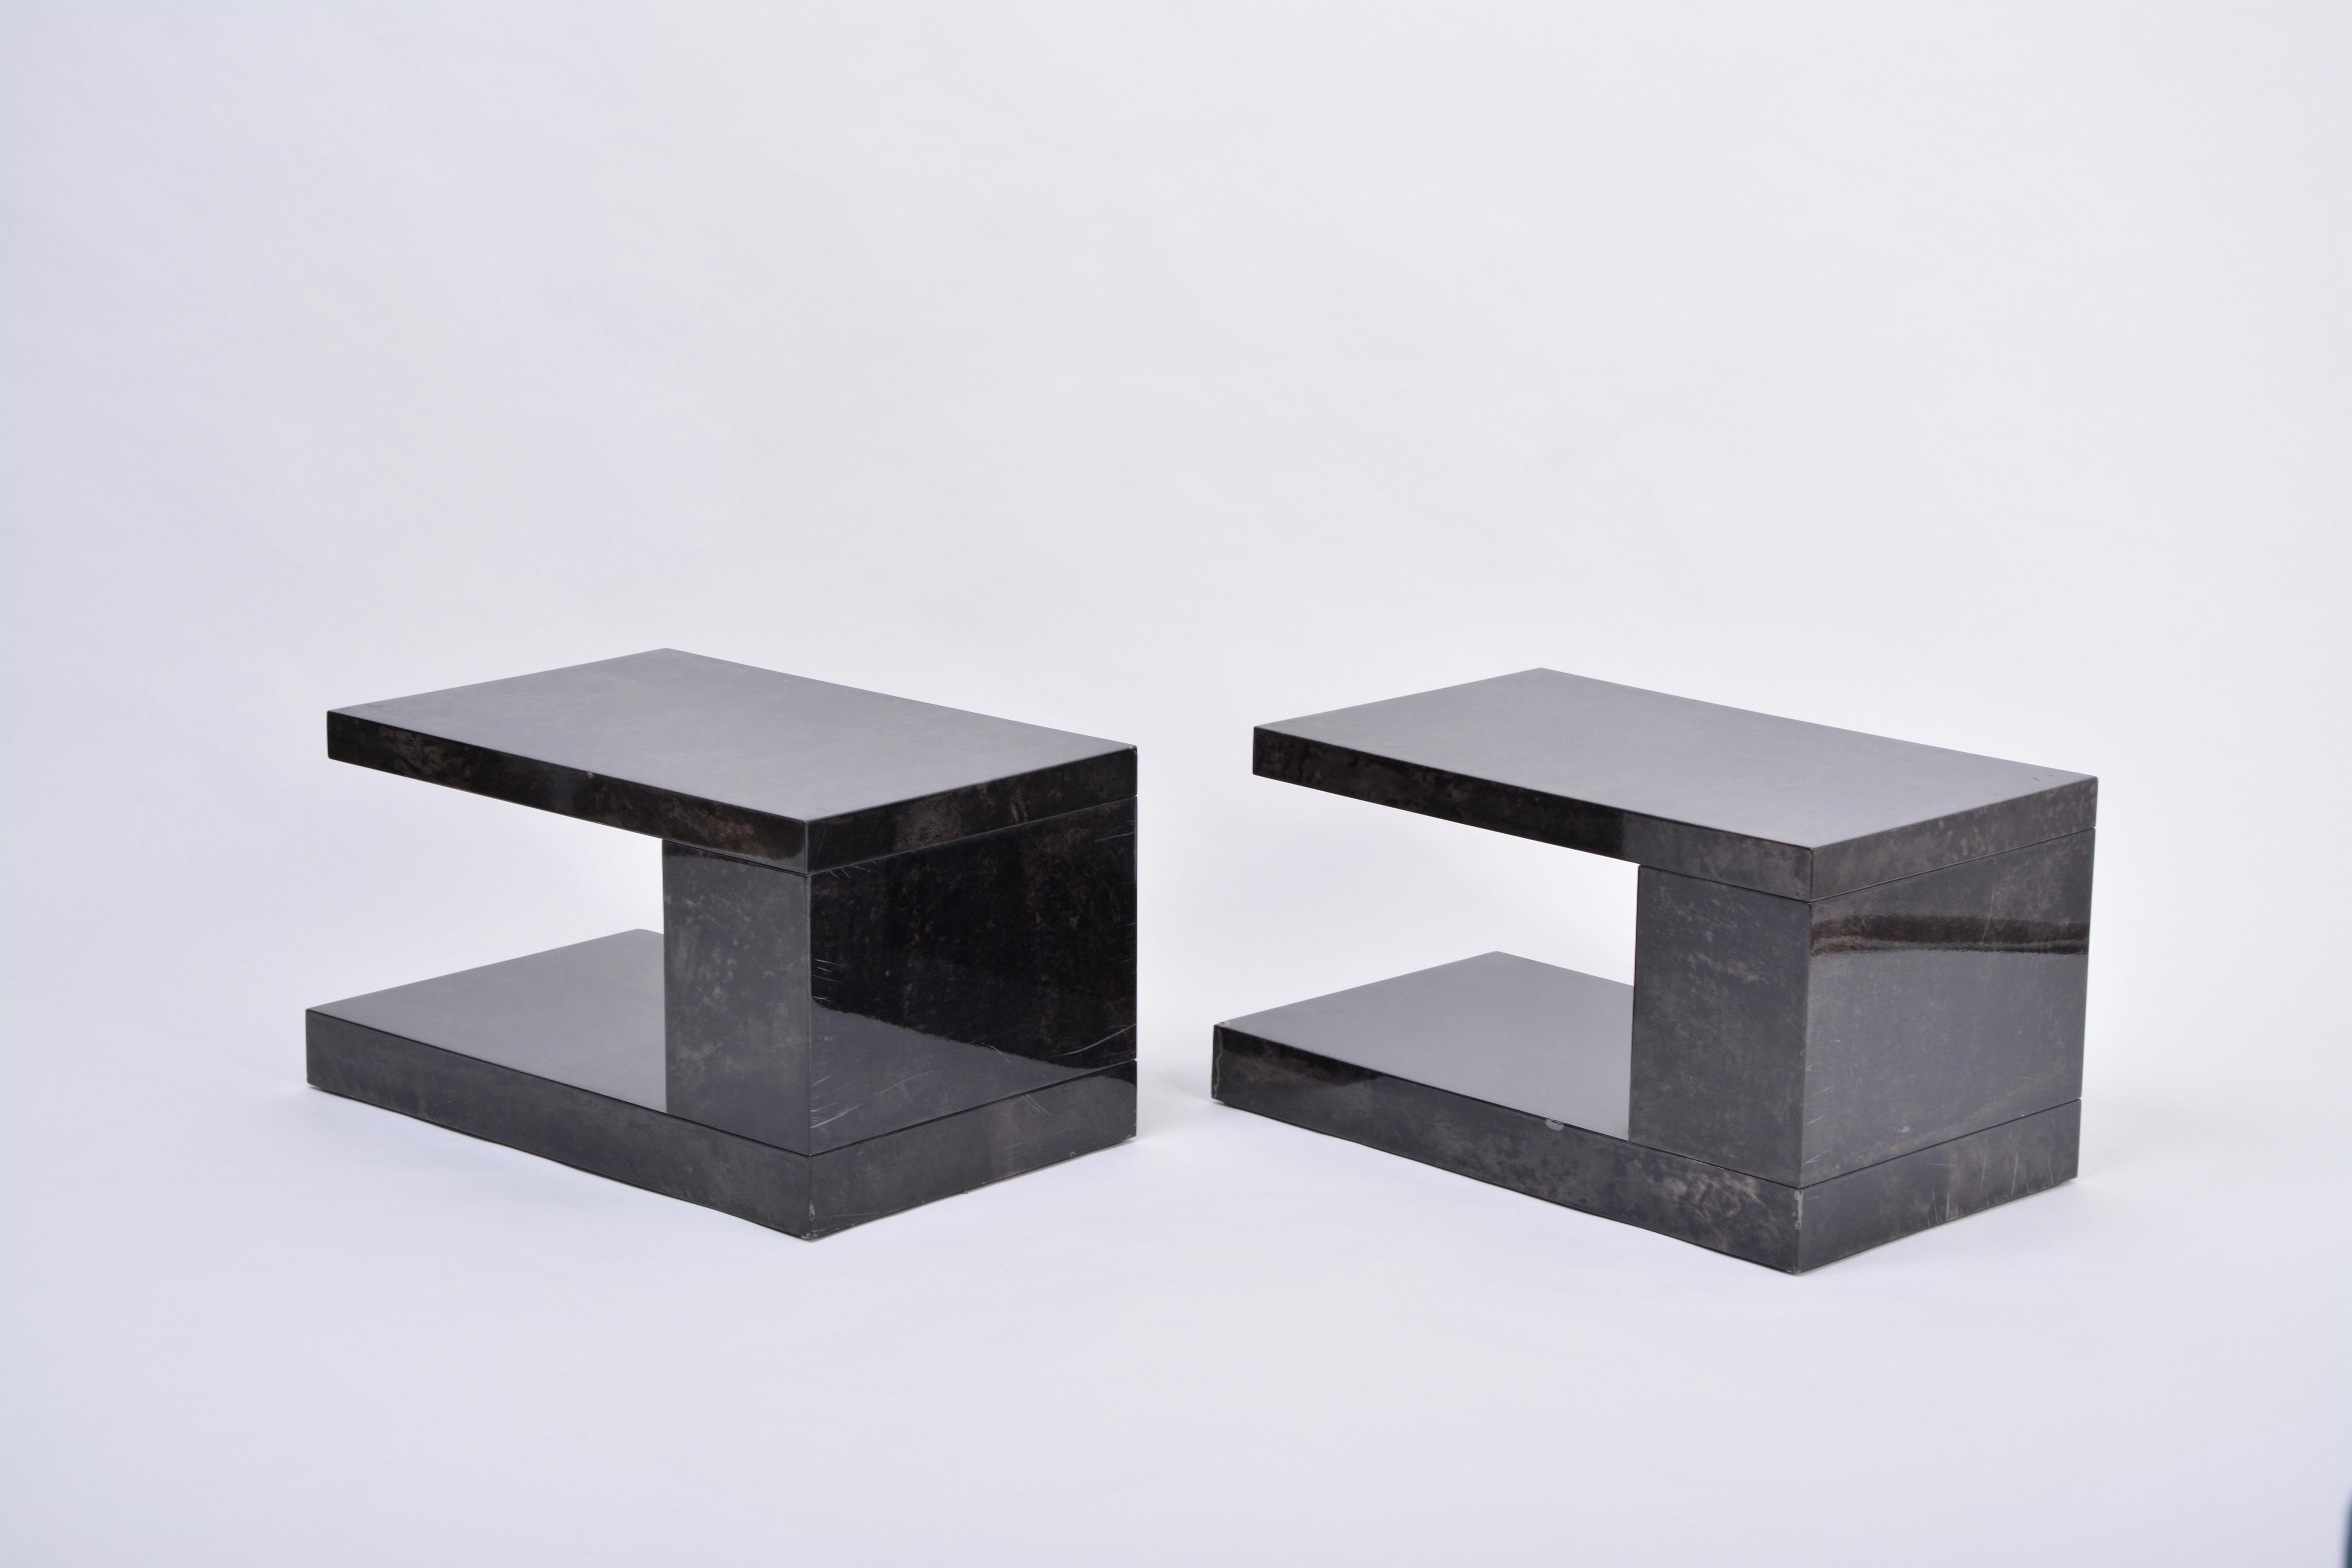 Hollywood Regency Pair of Lacquered Goat Skin Side Tables by Aldo Tura, 1970s